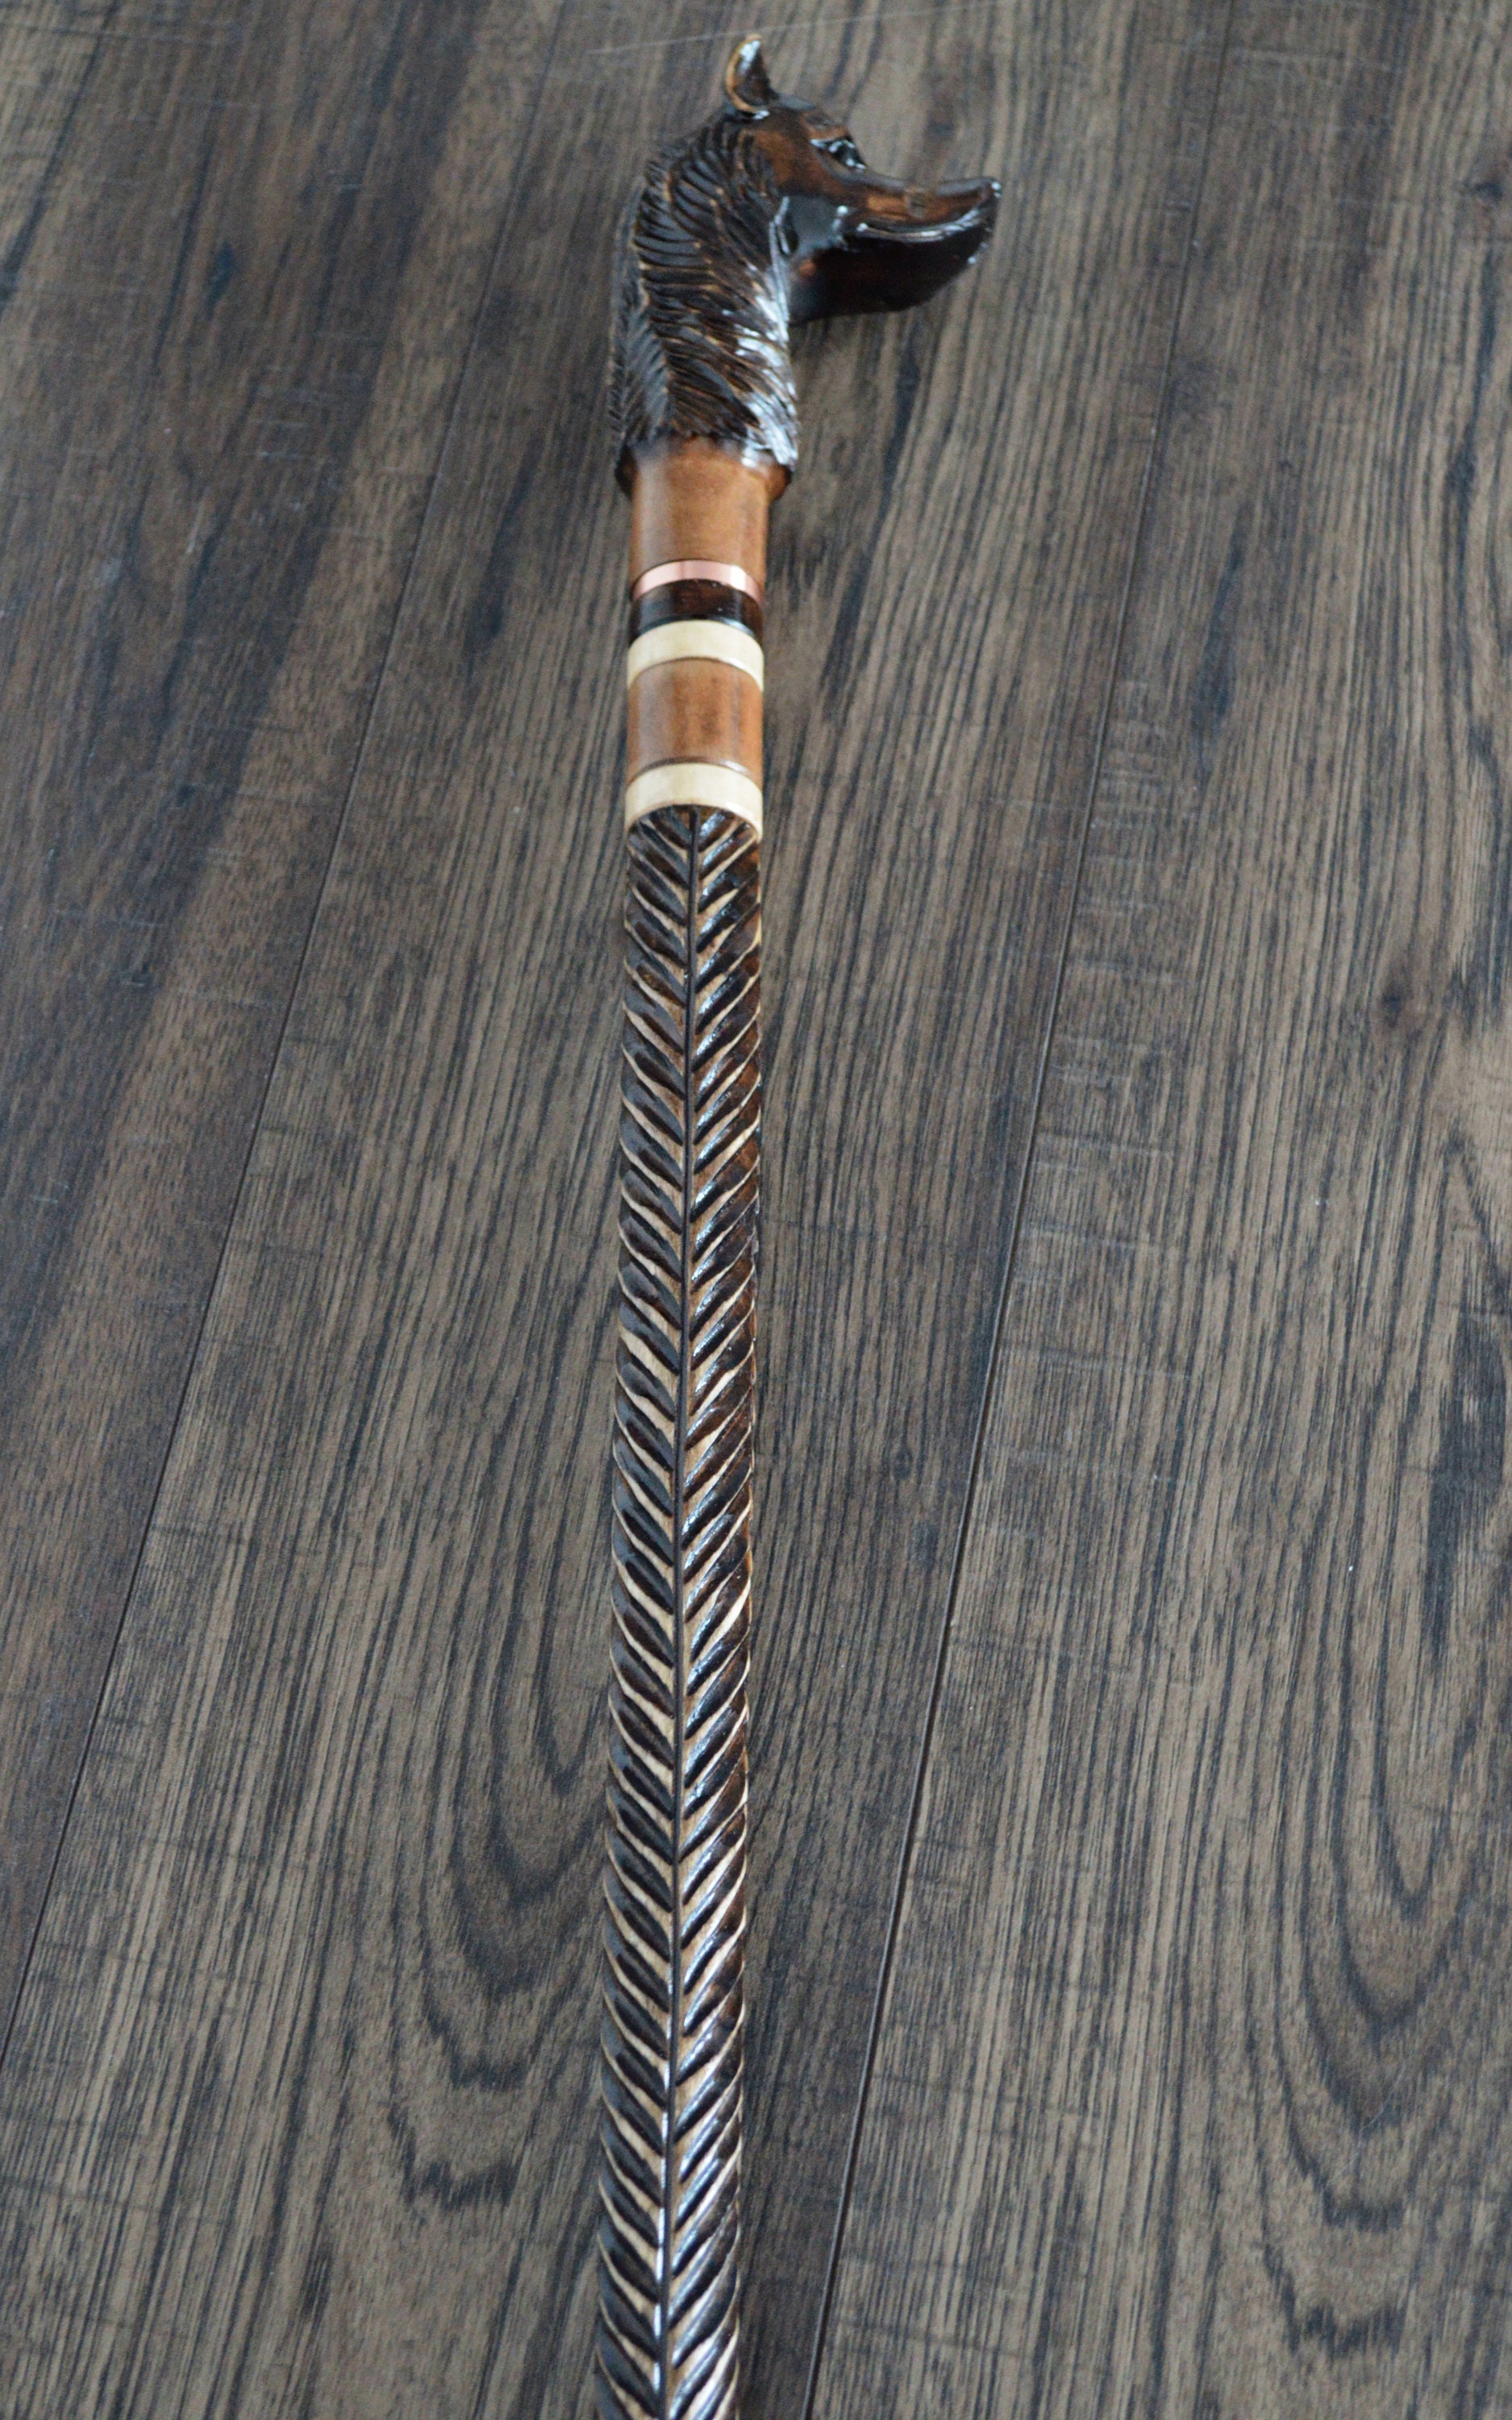 Dog Cane Collectible Cane Wooden Cane Walking Cane Wooden - Etsy